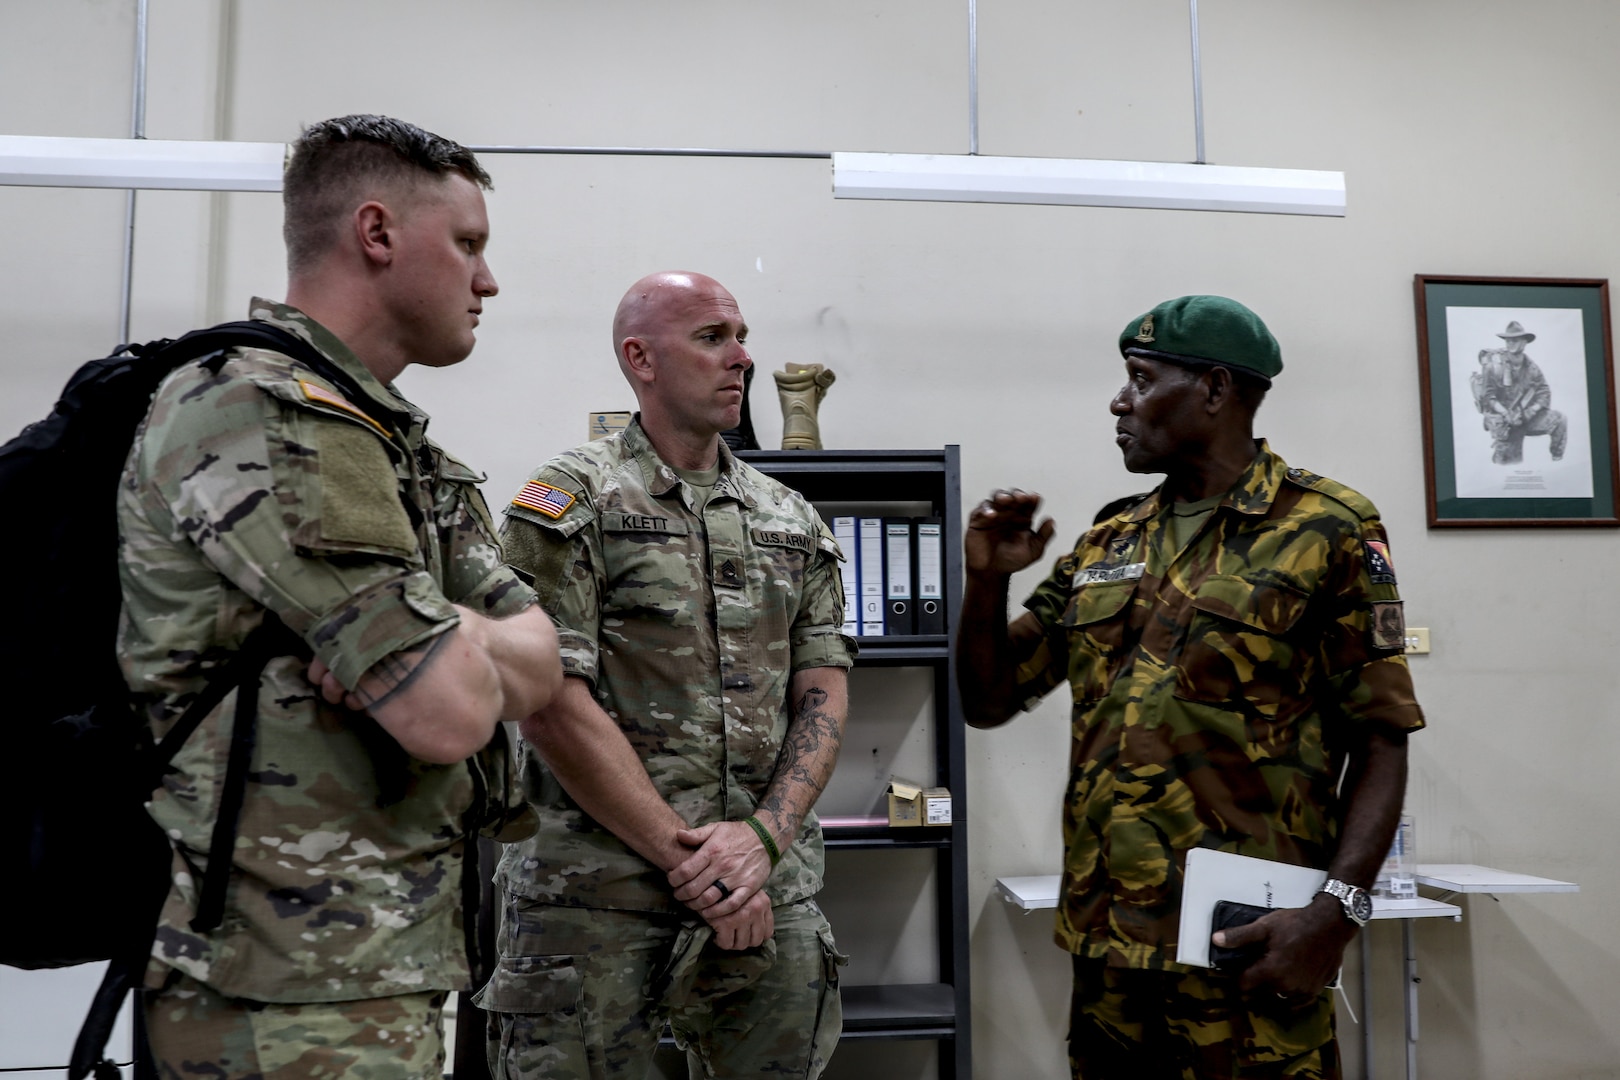 Senior noncommissioned officers with the Wisconsin National Guard were in Papua New Guinea March 17-22 collaborating with leaders in the Papua New Guinea Defence Force as part of the State Partnership Program.